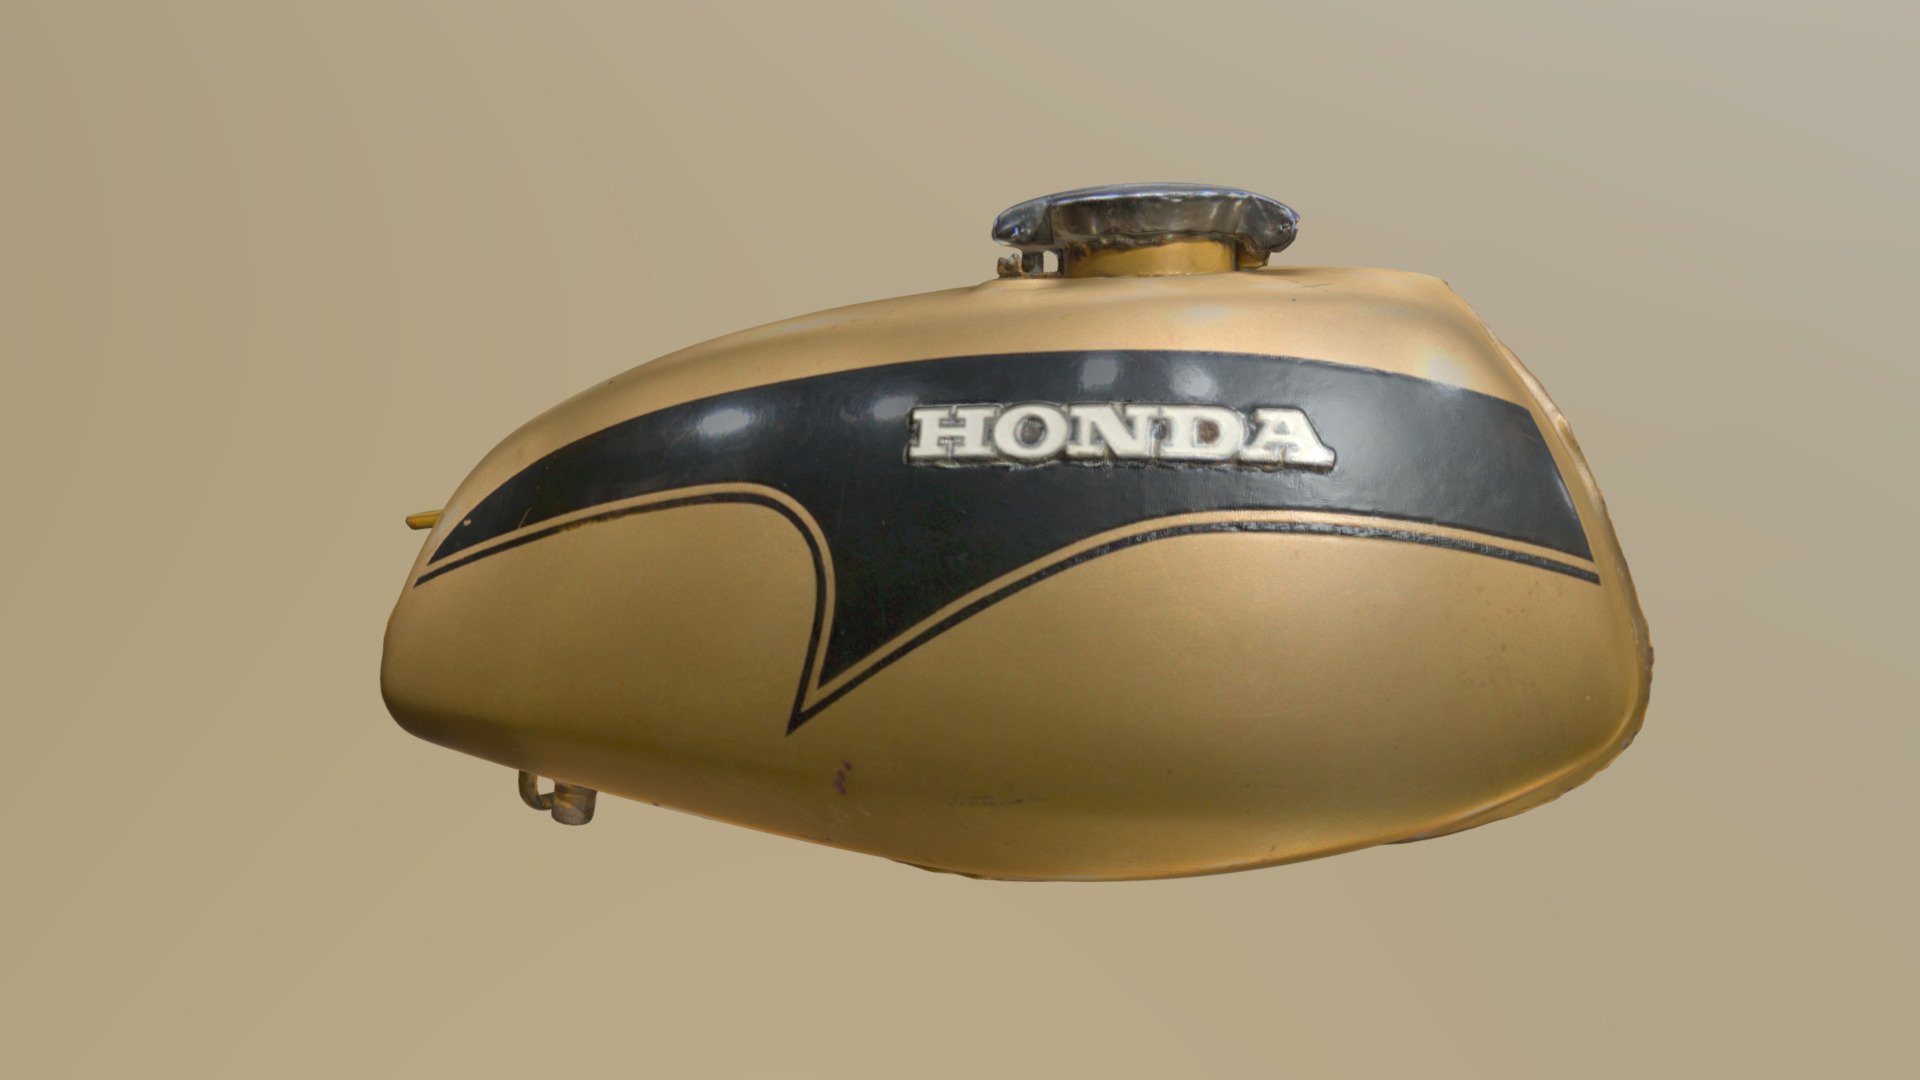 3D scan of the fuel tank from a 1971 Honda CL350 Scrambler. Done with the Artec Eva in HD mode and Artec Studio 15. Mesh simplified from 31 million triangles to 2 million before texturing. To see the complete motorcycle scan, visit: https://skfb.ly/6VTC7

For more information on the scanner, please visit: https://gomeasure3d.com/artec/eva/

To learn more about Artec’s new HD mode, please visit: https://gomeasure3d.com/artec/hd-mode/ - Motorcycle Fuel Tank - Artec Eva 3D Scan - Download Free 3D model by GoMeasure3D 3d model